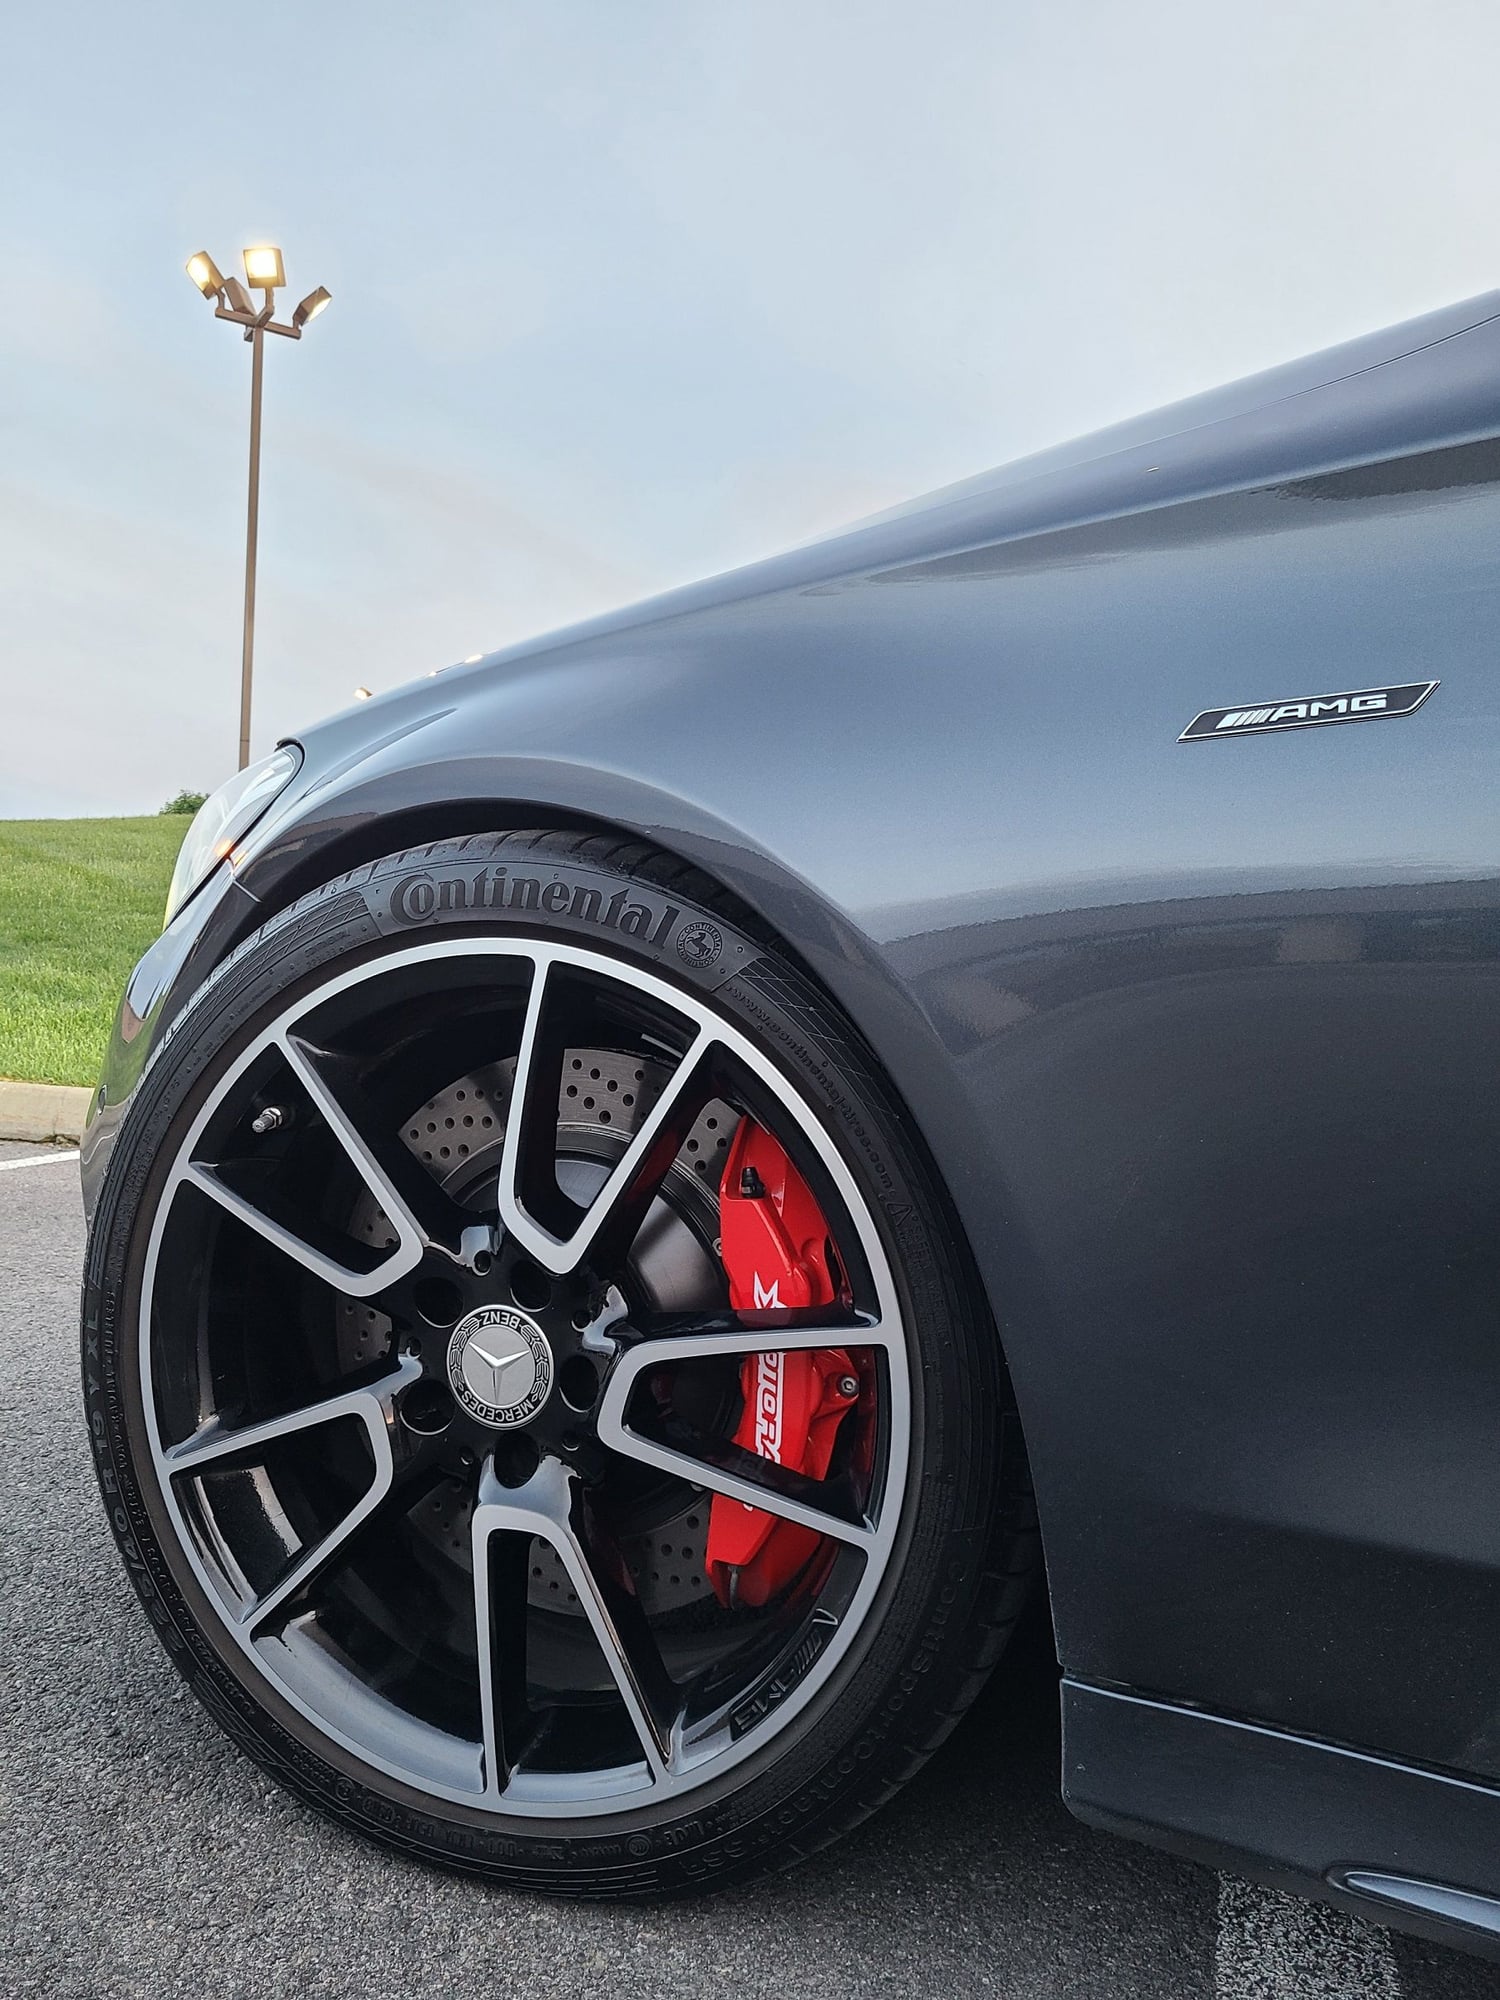 Wheels and Tires/Axles - FS: 19'' AMG W205 wheels - Used - 2016 to 2021 Mercedes-Benz C450 AMG - Kennewick, WA 99336, United States